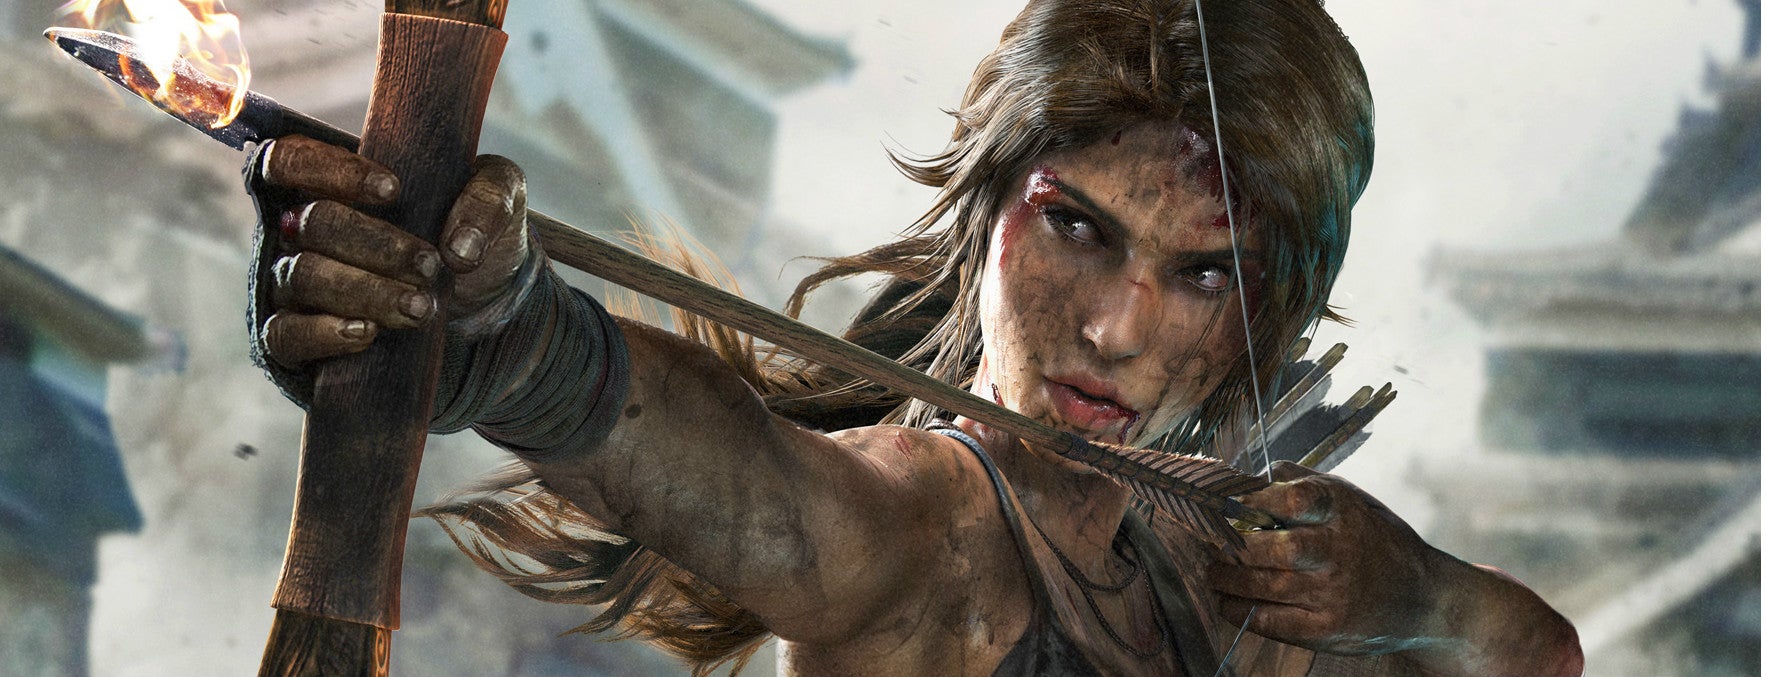 Image for Tomb Raider Definitive Edition PS4 & Xbox One Review: Challenging The PC